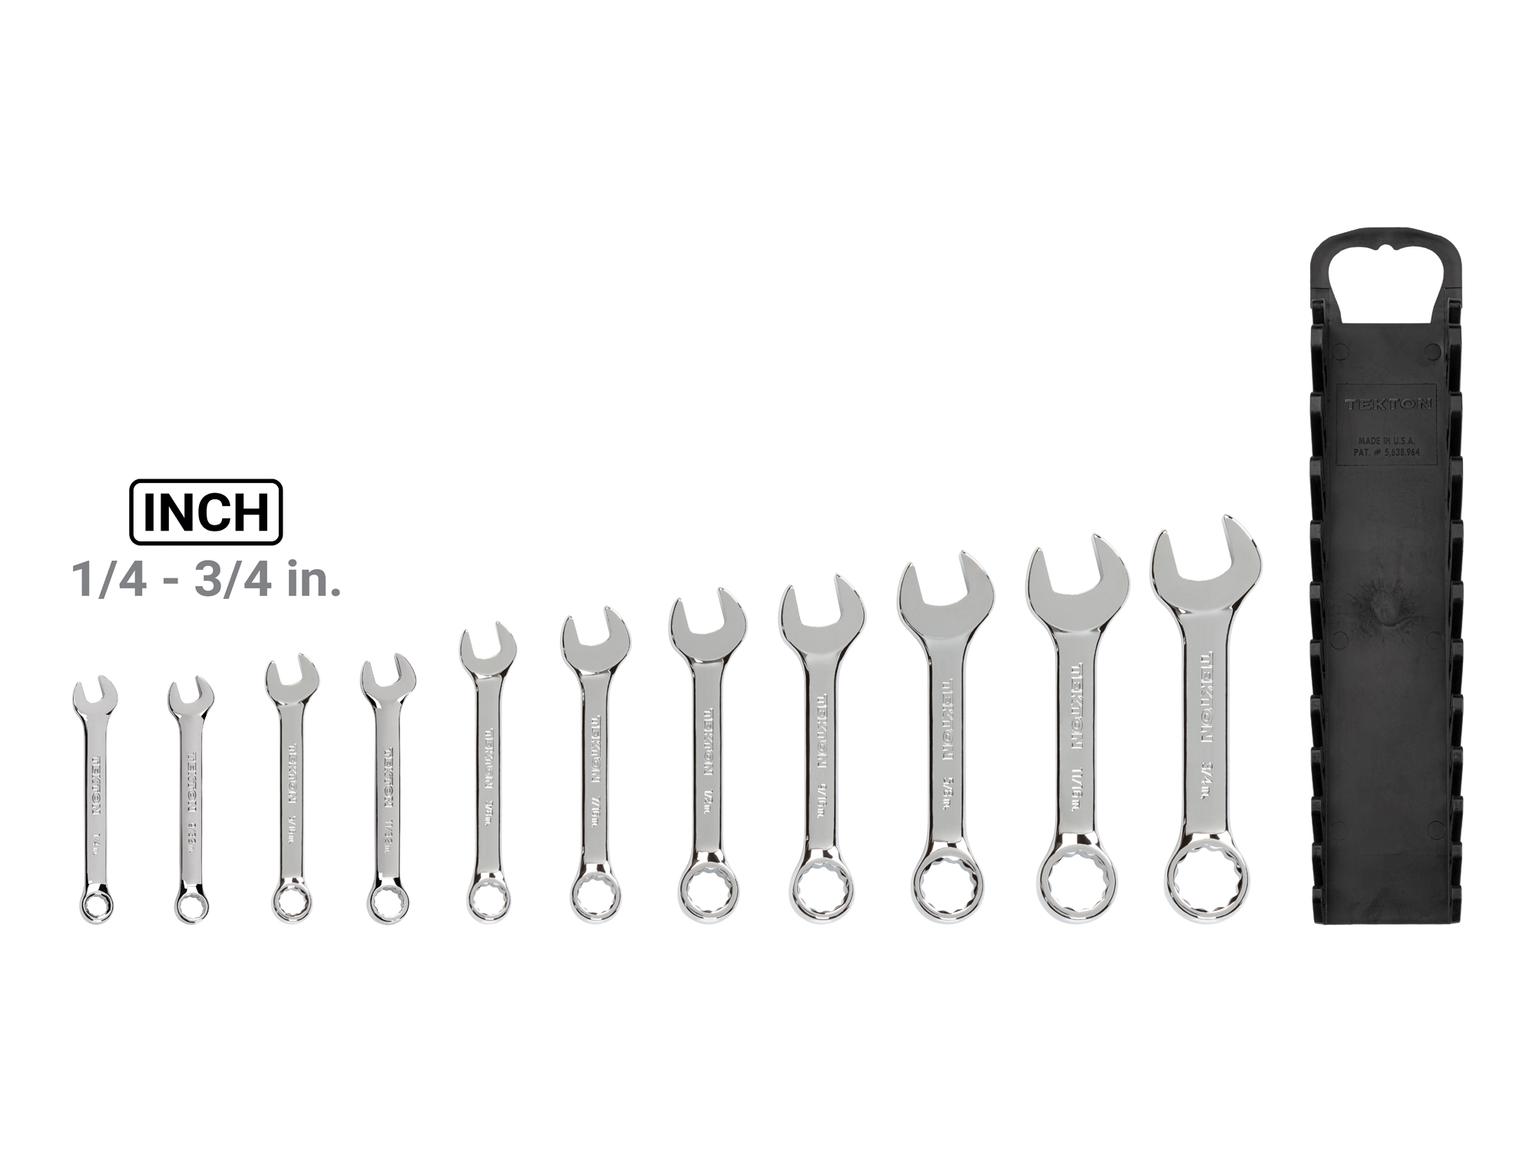 TEKTON WCB92401-T Stubby Combination Wrench Set with Holder, 11-Piece (1/4 - 3/4 in.)